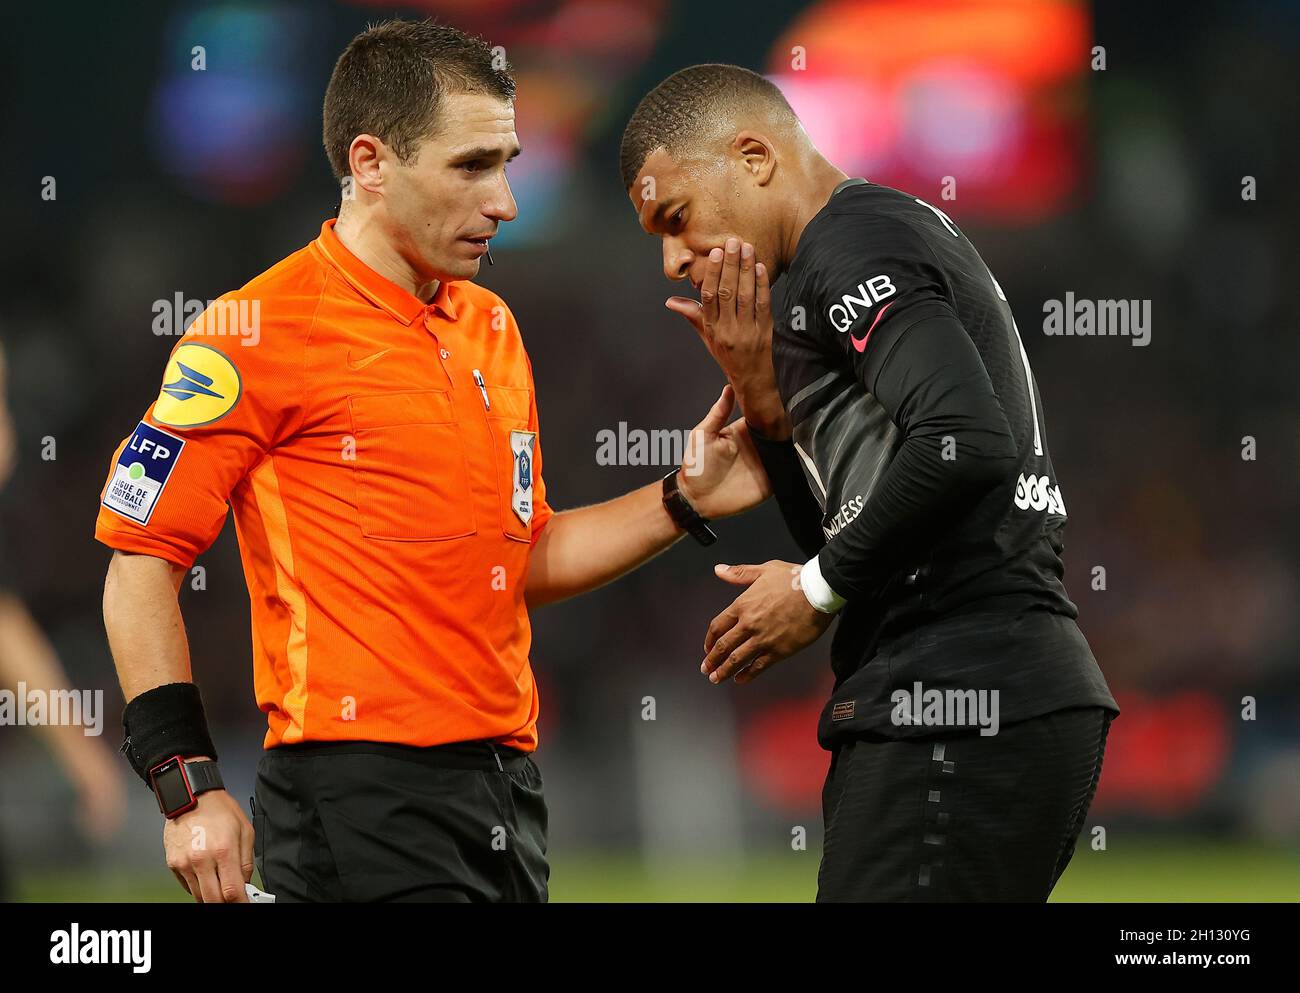 Paris, France. 16th Oct, 2021. Paris Saint Germain's Kylian Mbappe (R) speaks with the referee after being injured during a French Ligue 1 football match between Paris Saint Germain (PSG) and Angers SCO in Paris, France, Oct. 15, 2021. Credit: Xinhua/Alamy Live News Stock Photo